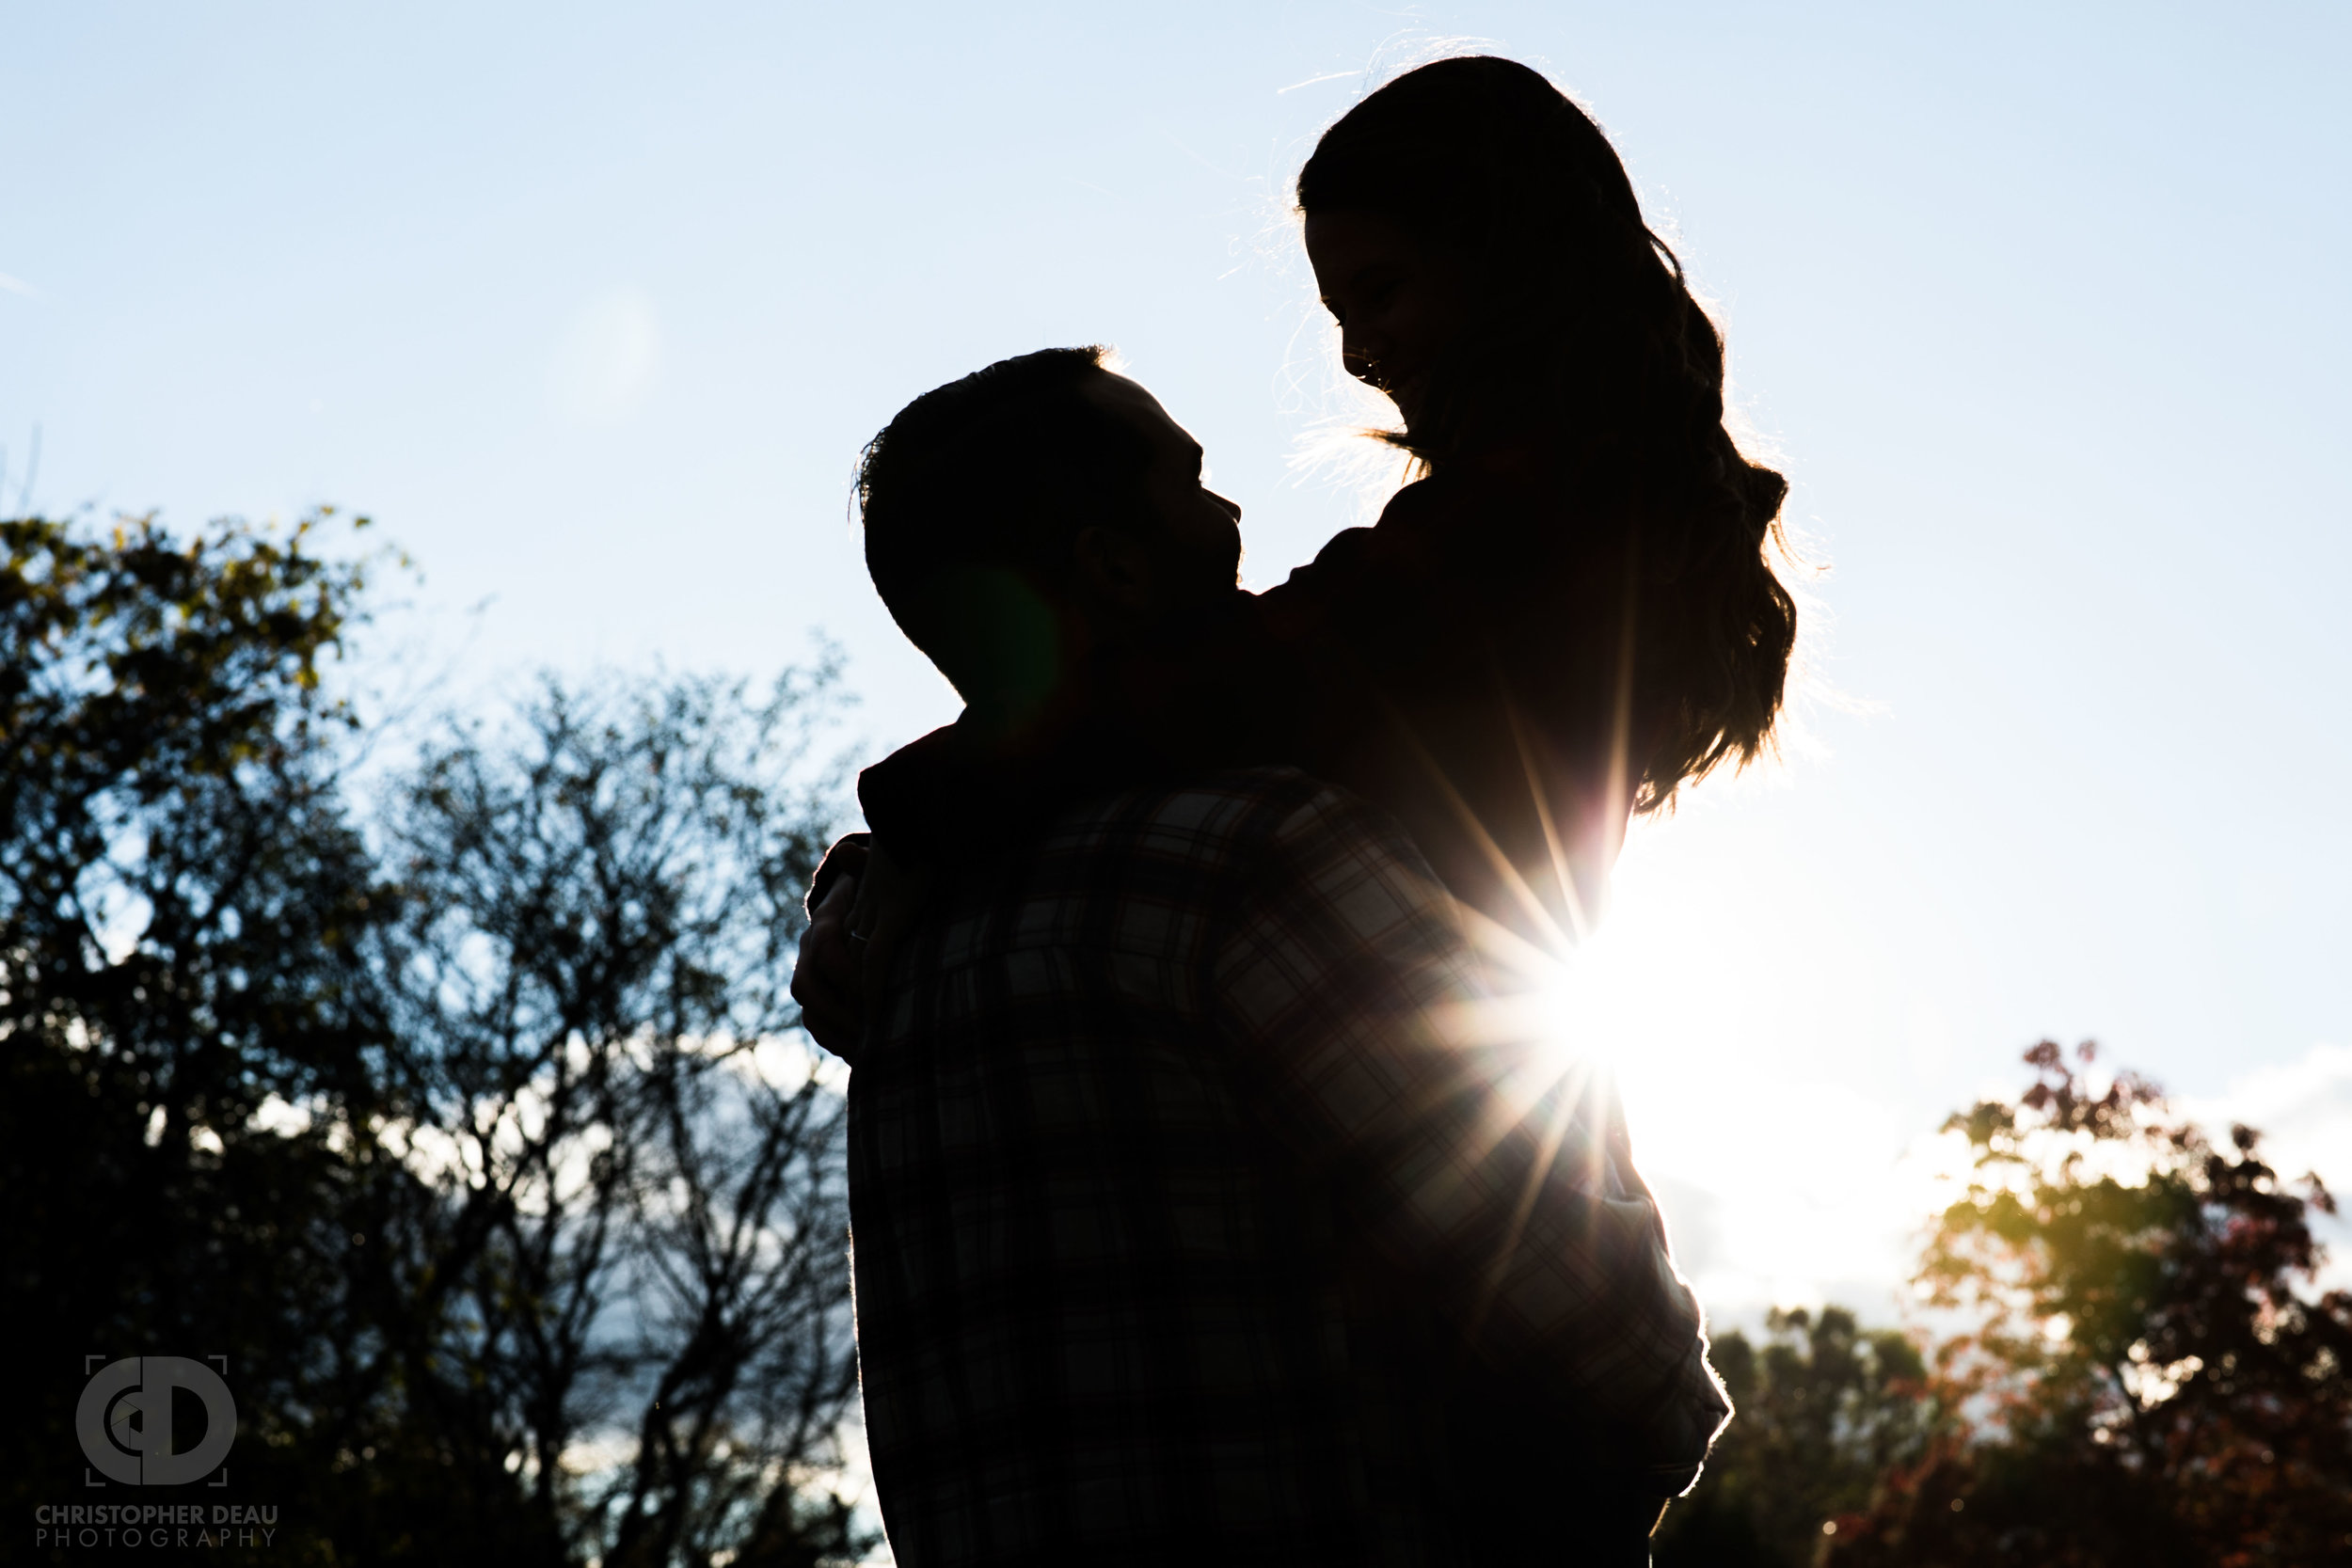  Silhouette of man lifting woman with the sun glaring behind 